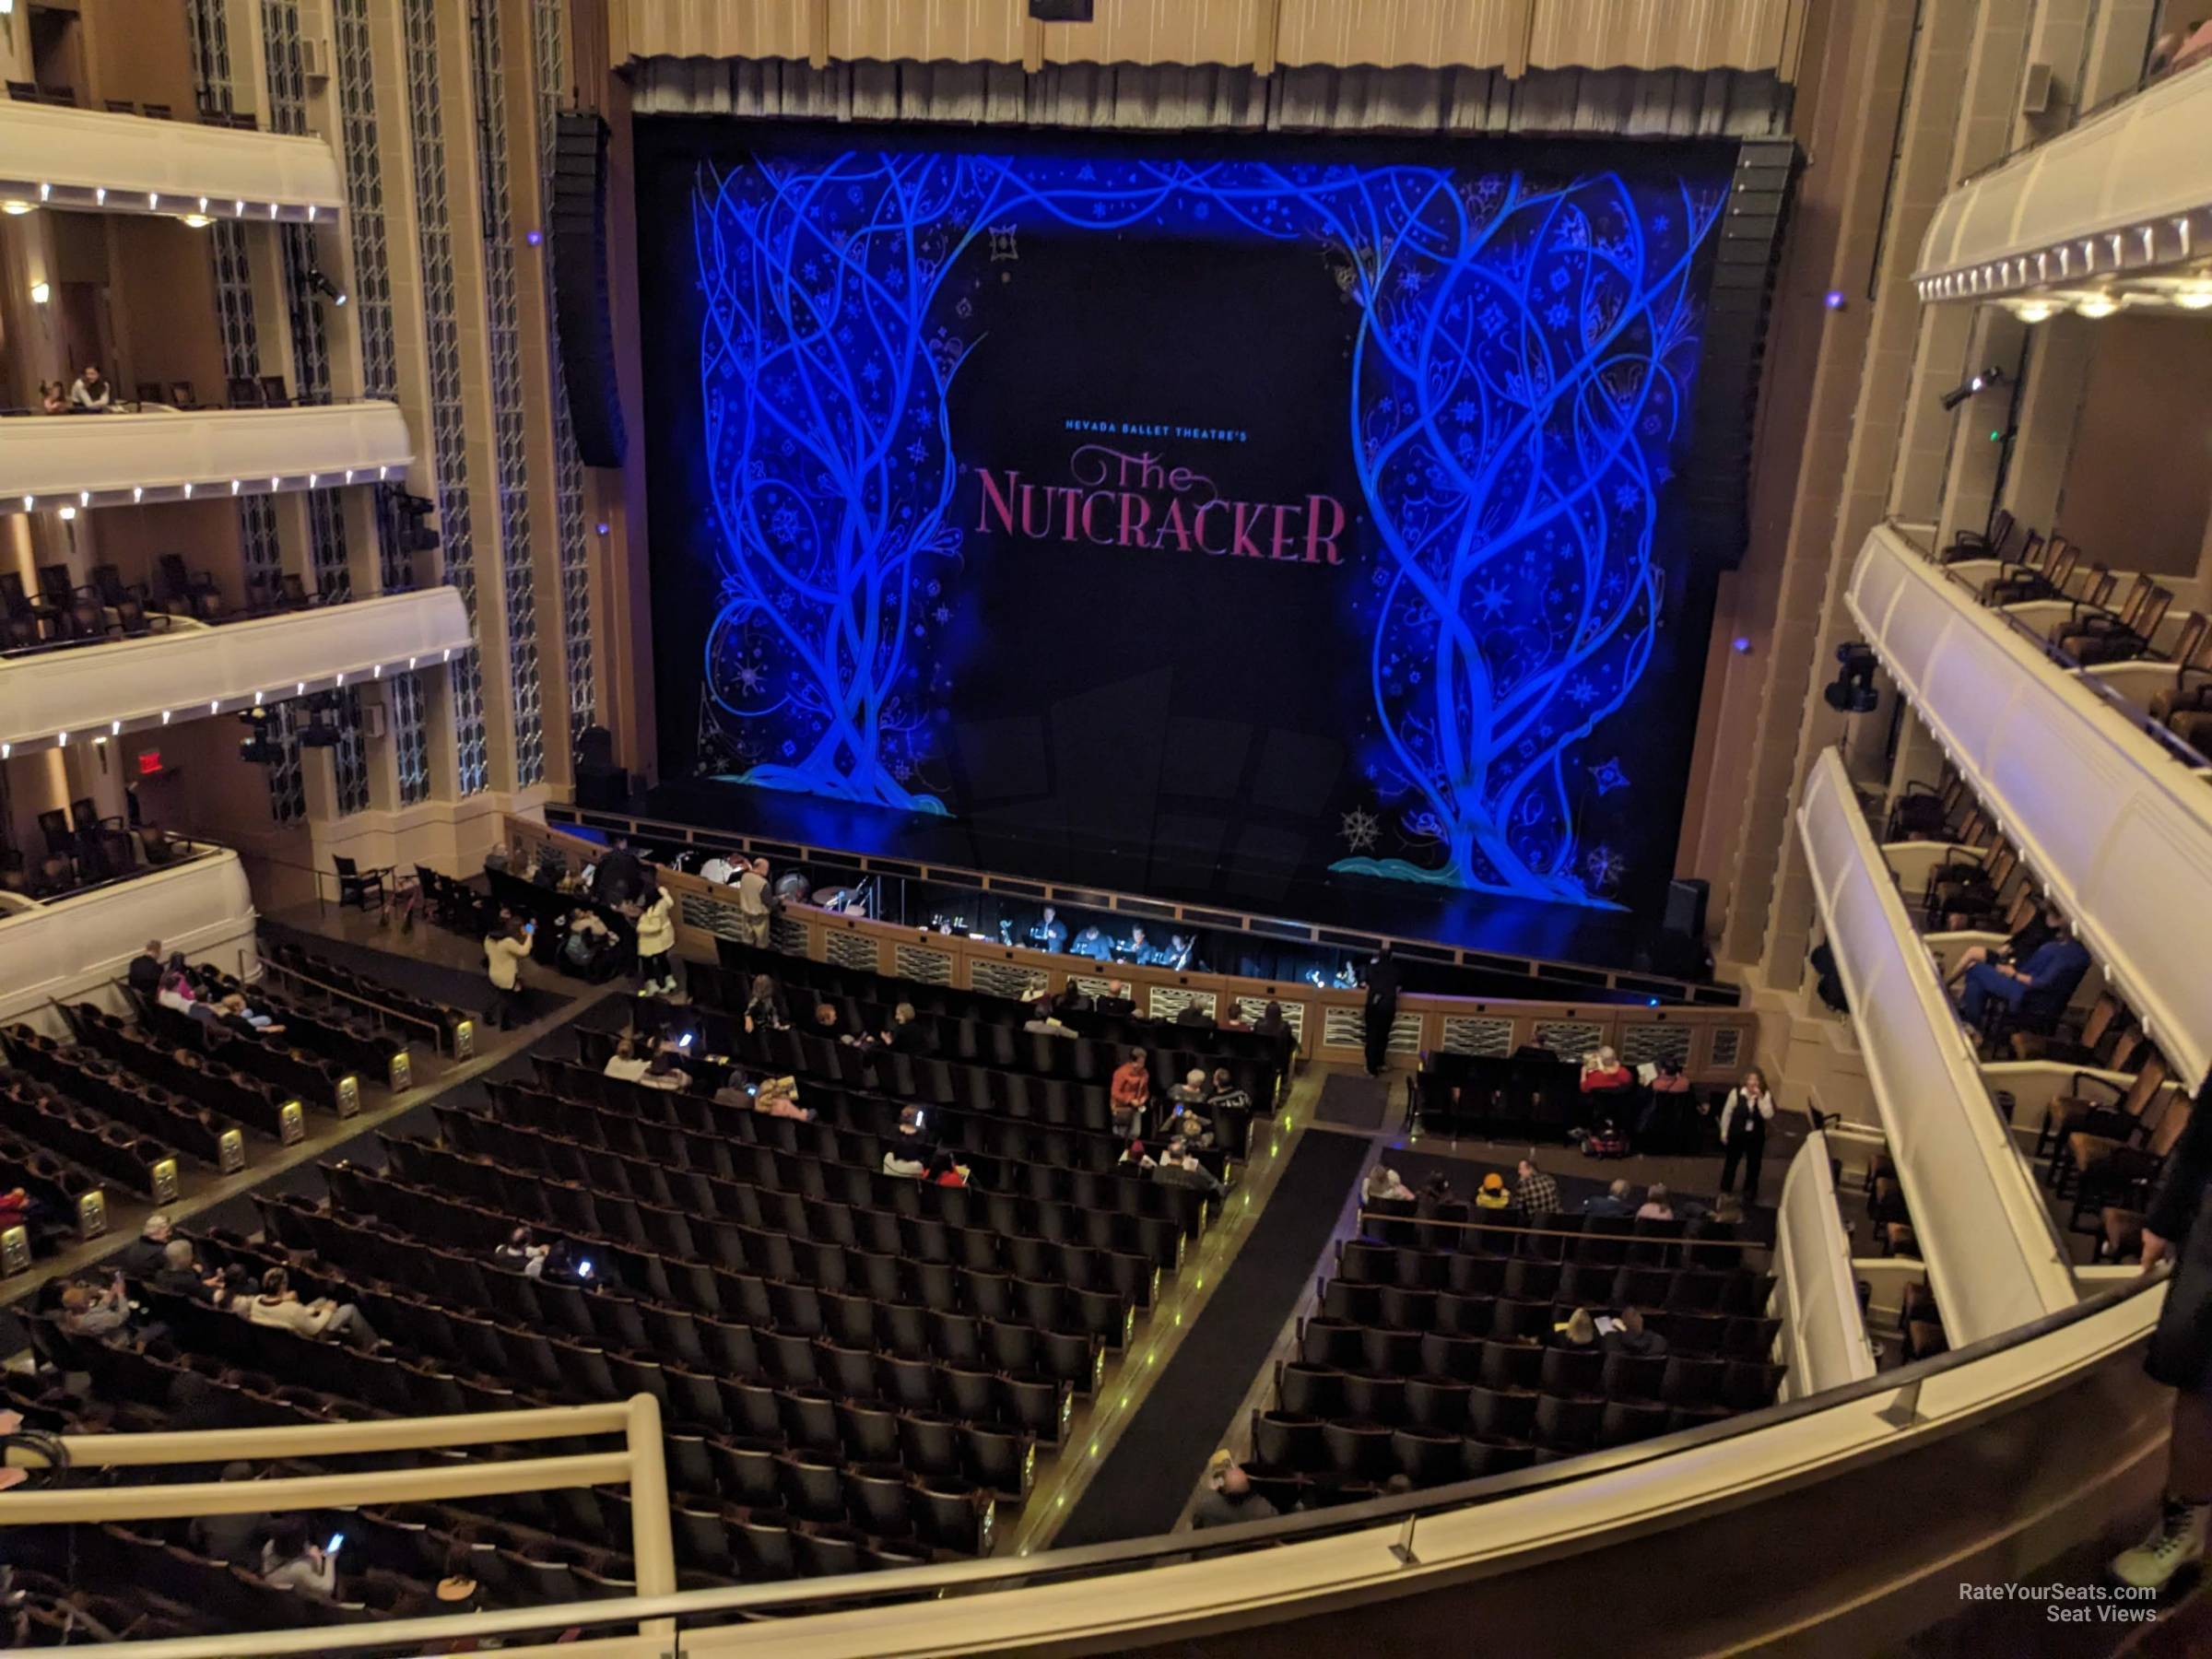 dress circle right, row c seat view  - reynolds hall at smith center